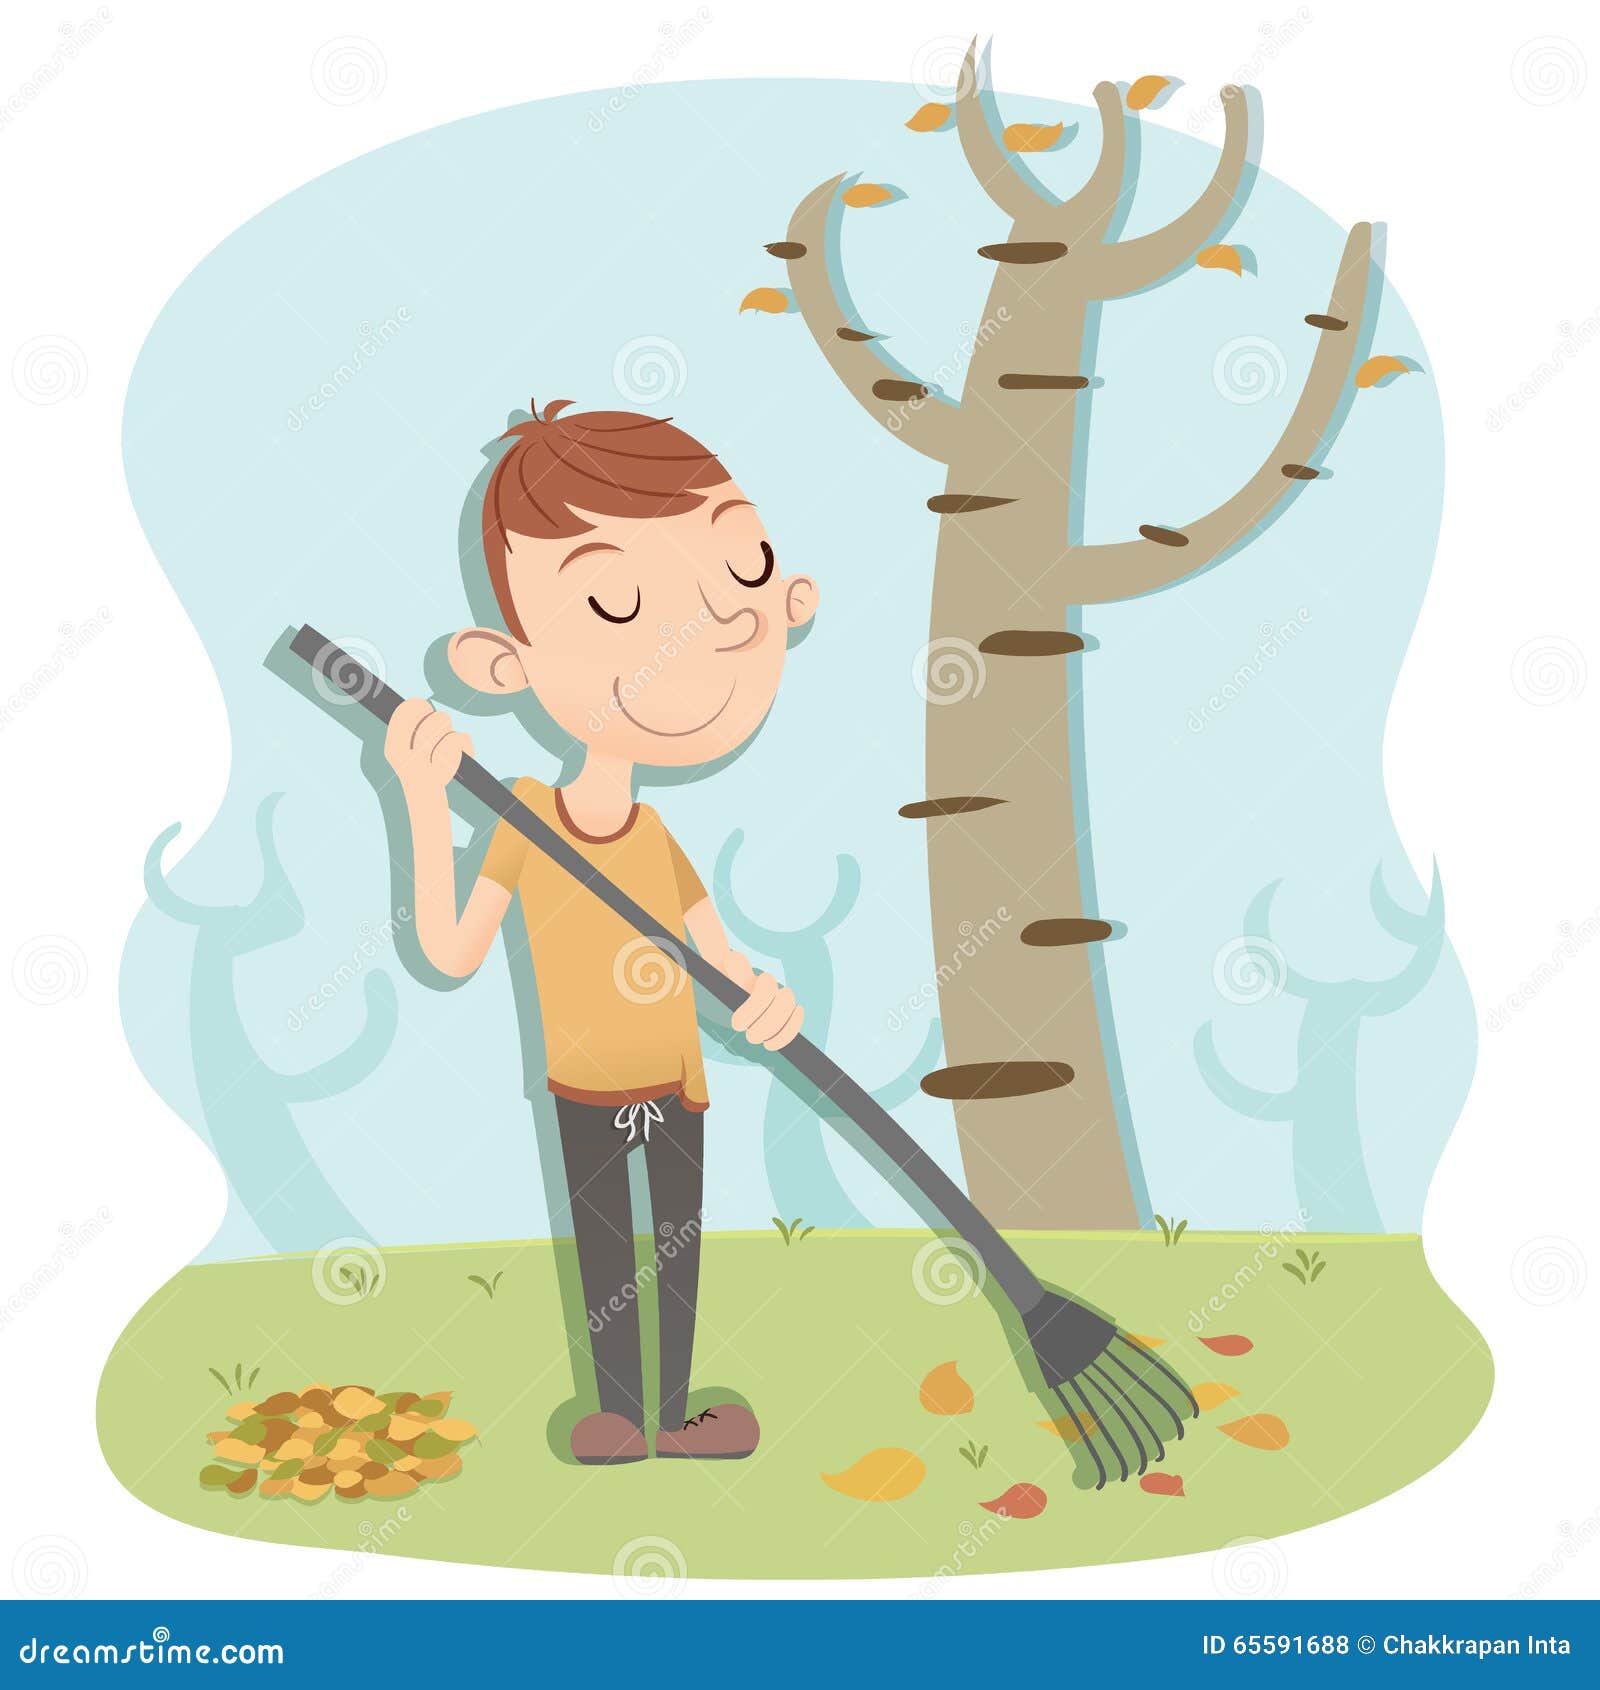 Man sweeping leaves stock vector. Illustration of outdoor - 65591688